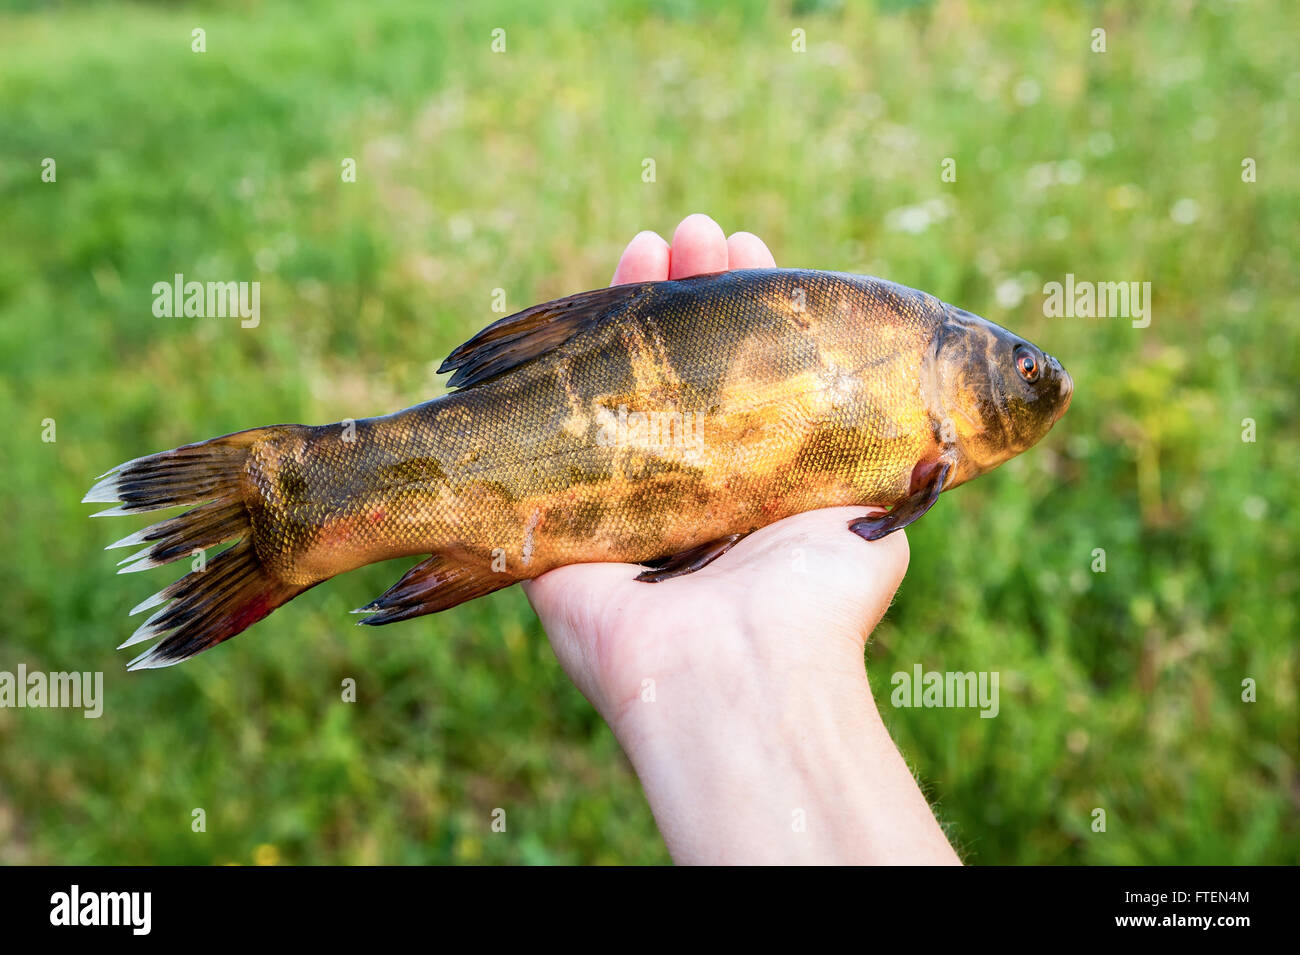 Caught raw freshwater tench in the hand Stock Photo